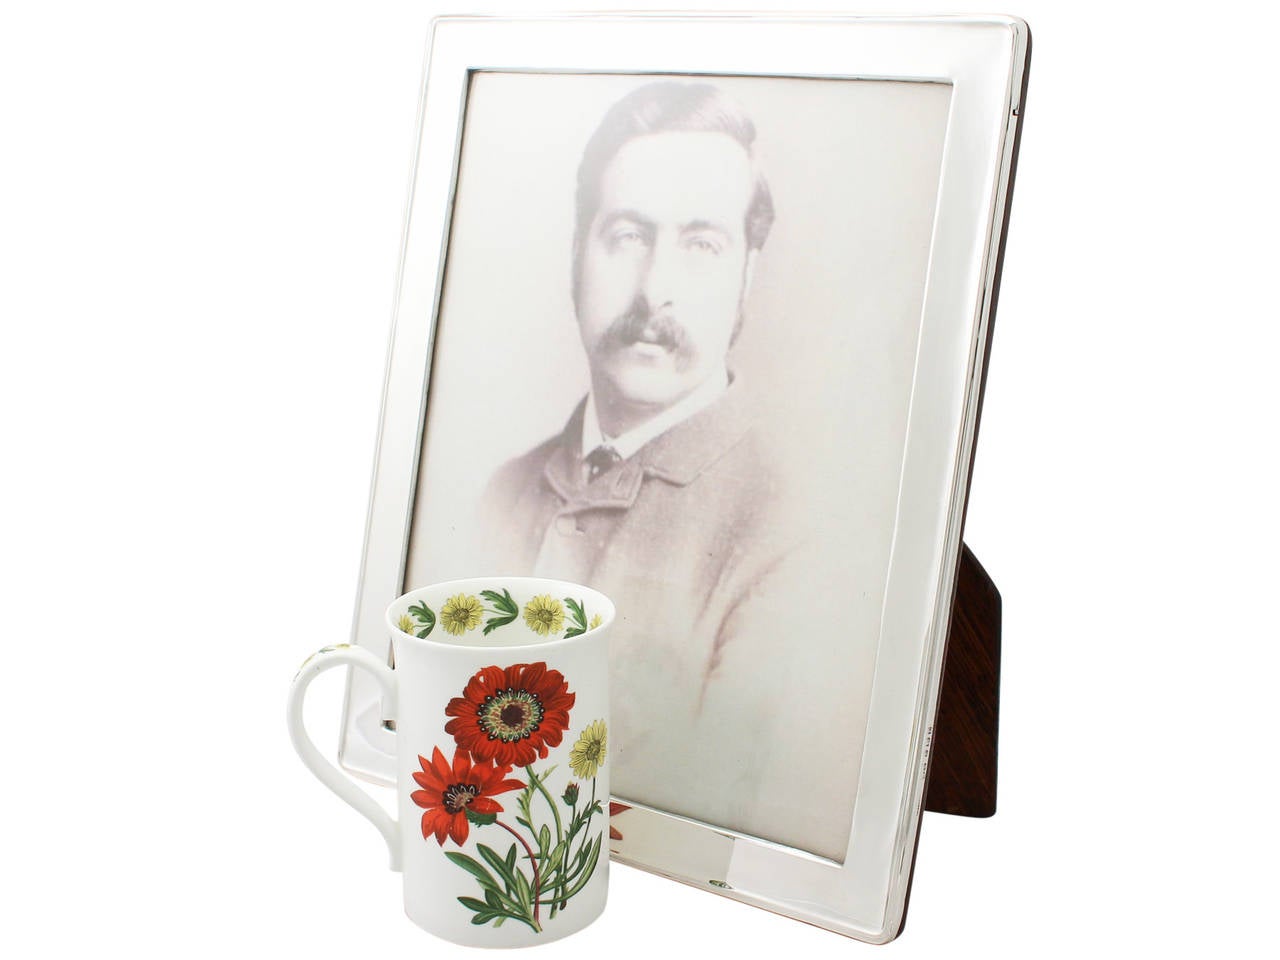 A fine and impressive antique George V English sterling silver photograph frame; an addition to our ornamental silverware collection.

This fine antique George V sterling silver photograph frame has a plain rectangular form with rounded